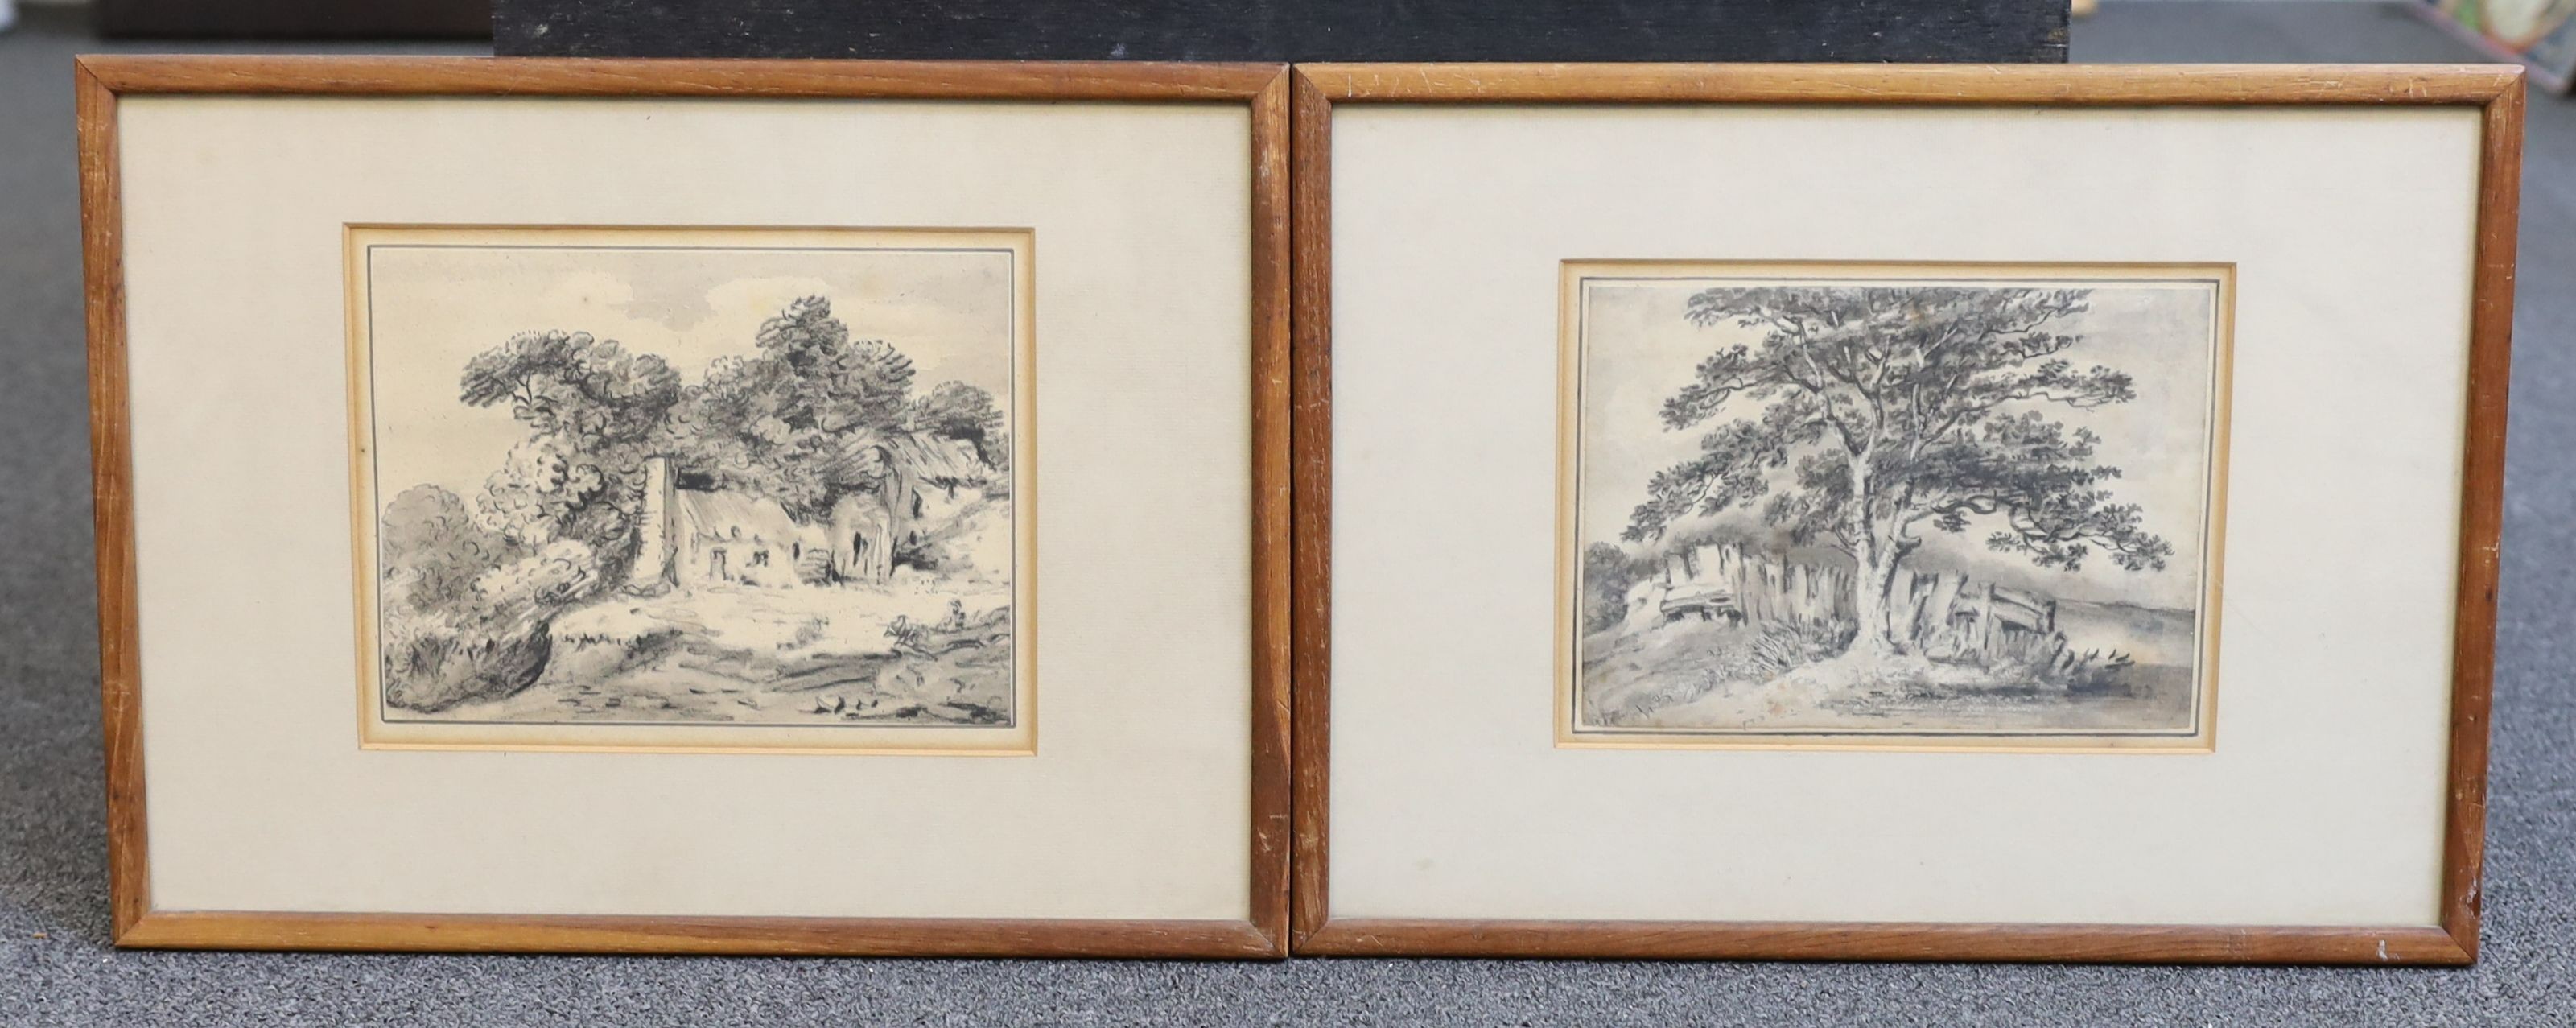 Dr Thomas Munro (1759-1833), Cottage and trees in a landscape and Tree and fence in a landscape, charcoal and wash, a pair, 15 x 20cm and 15.5 x 21cm